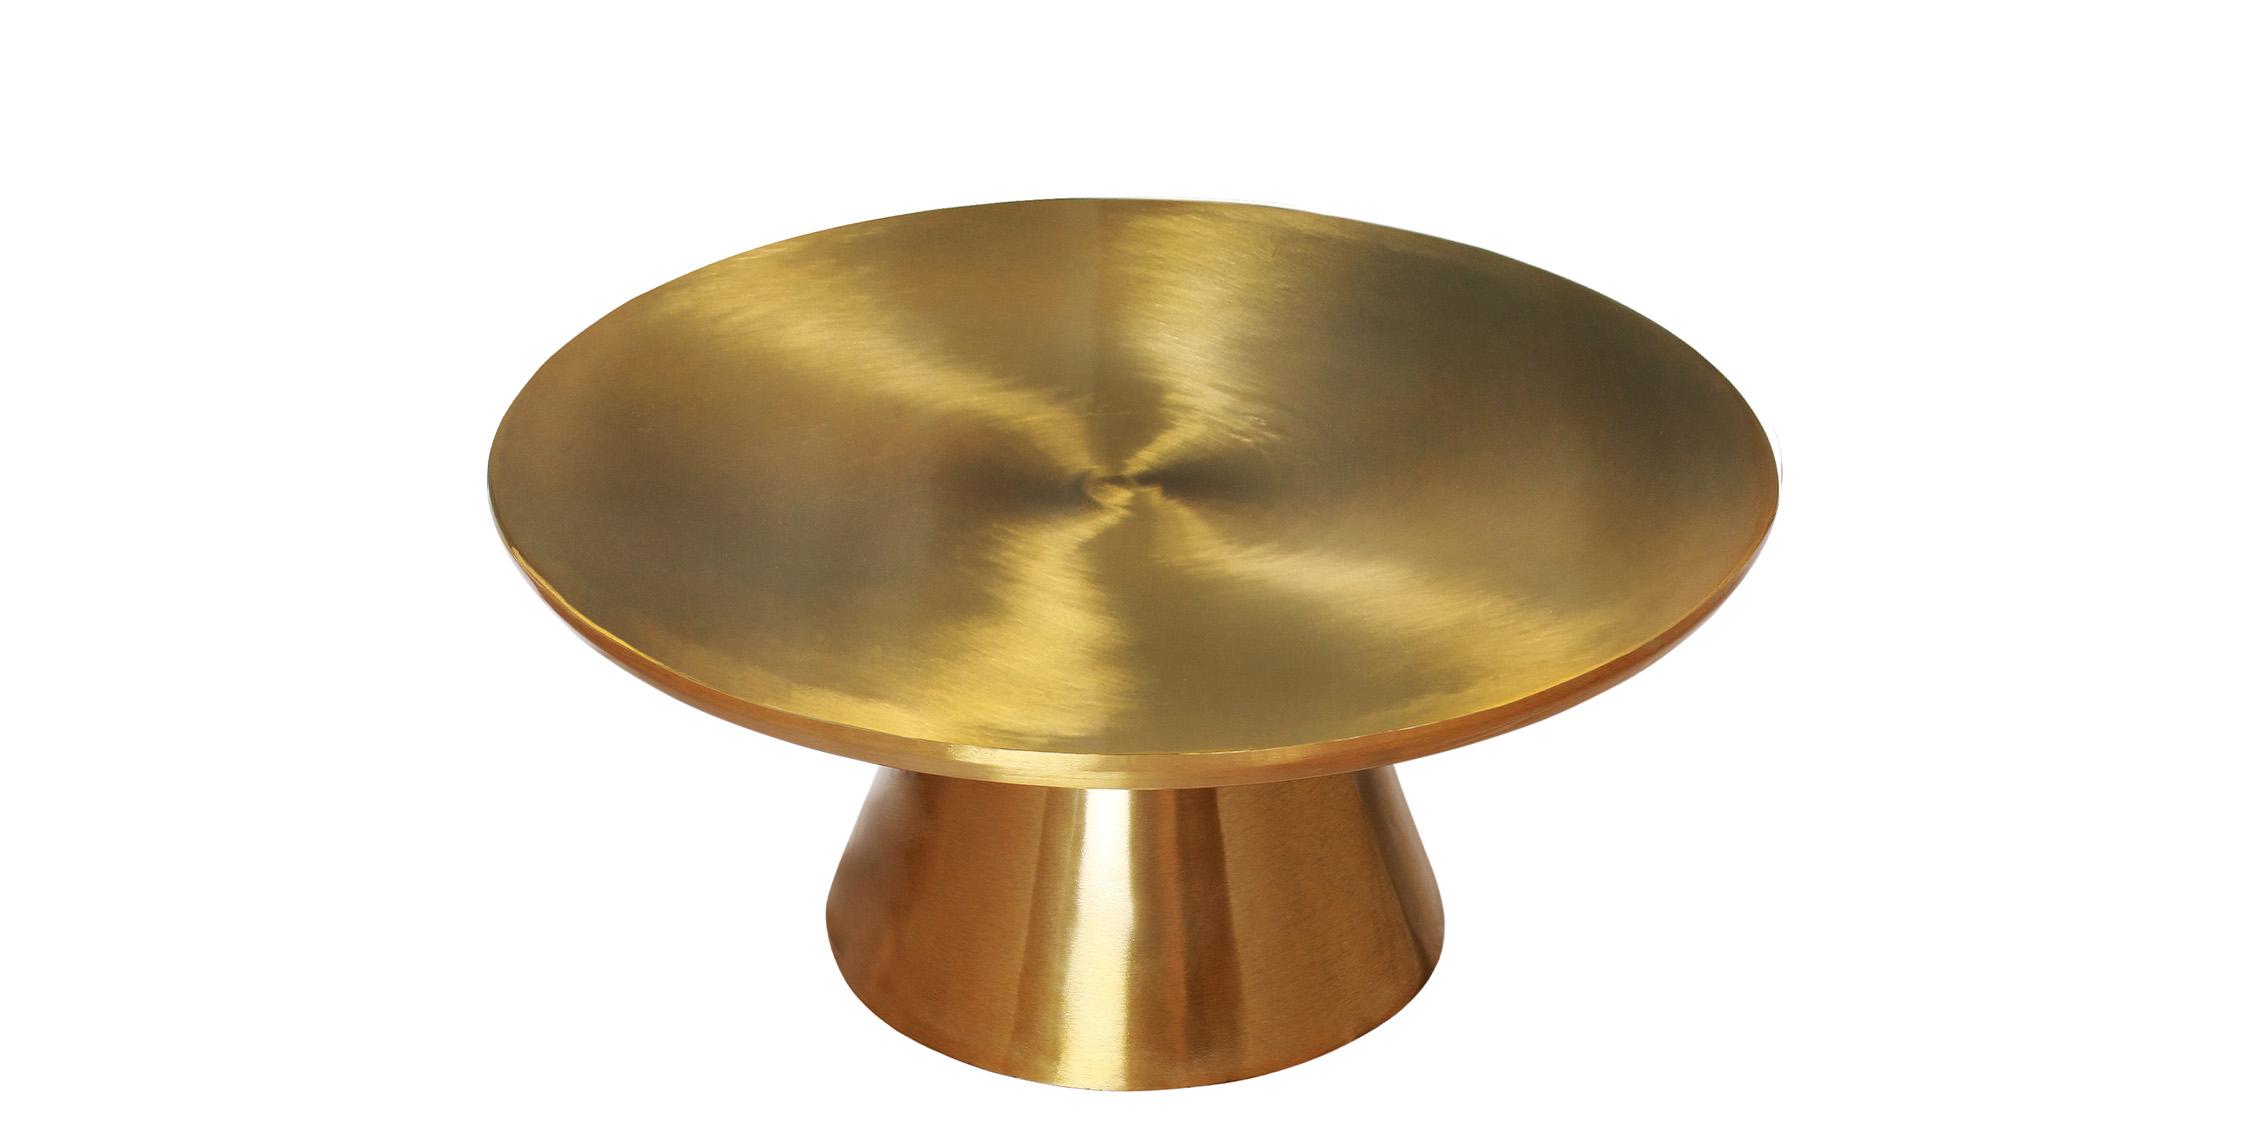 Contemporary, Modern Coffee Table MARTINI 239-C 239-C in Gold Finish Metal